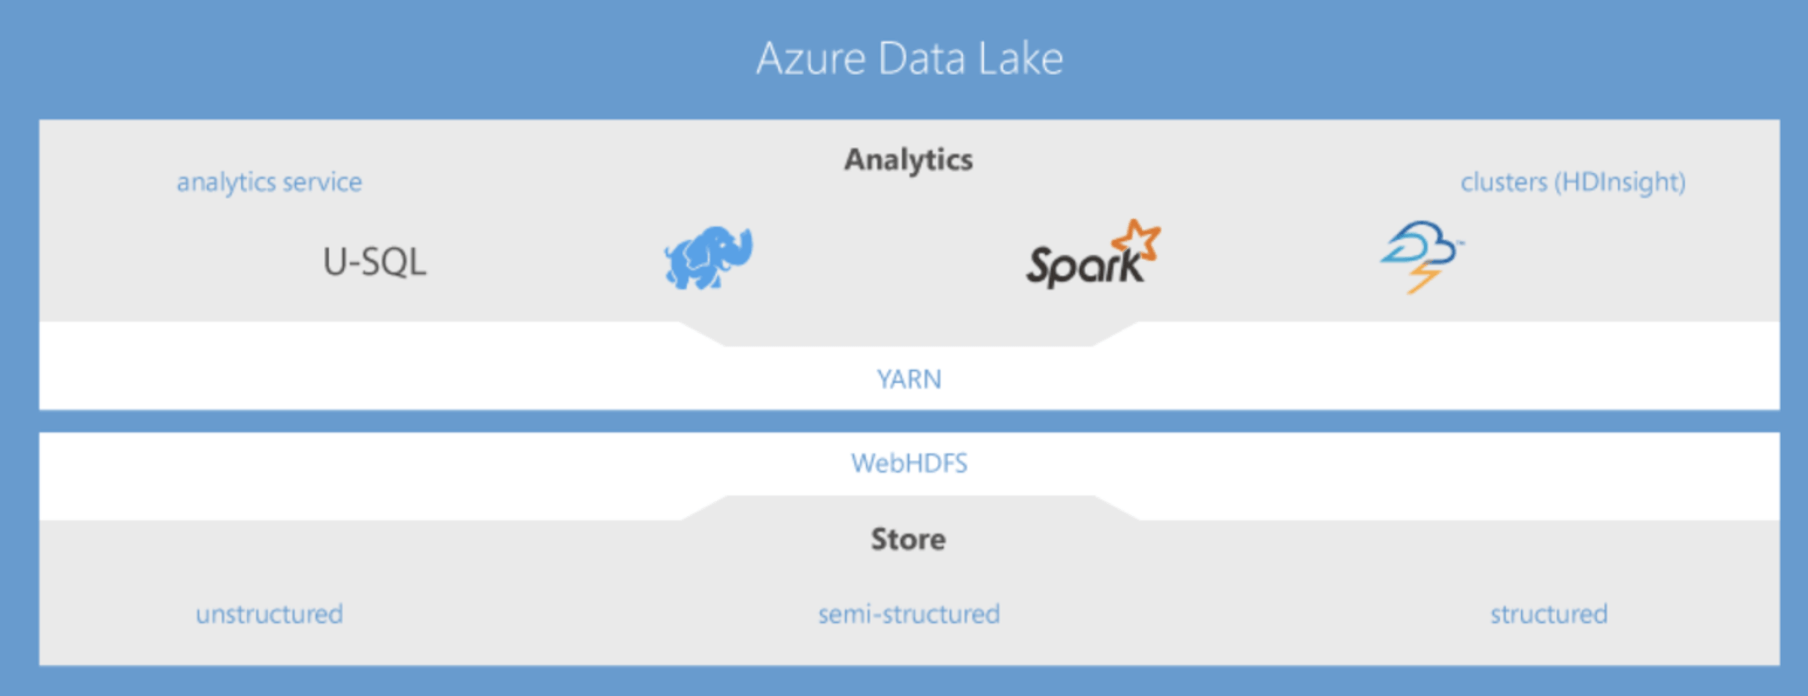 Graphic showing Azure data lake features hierarchy 